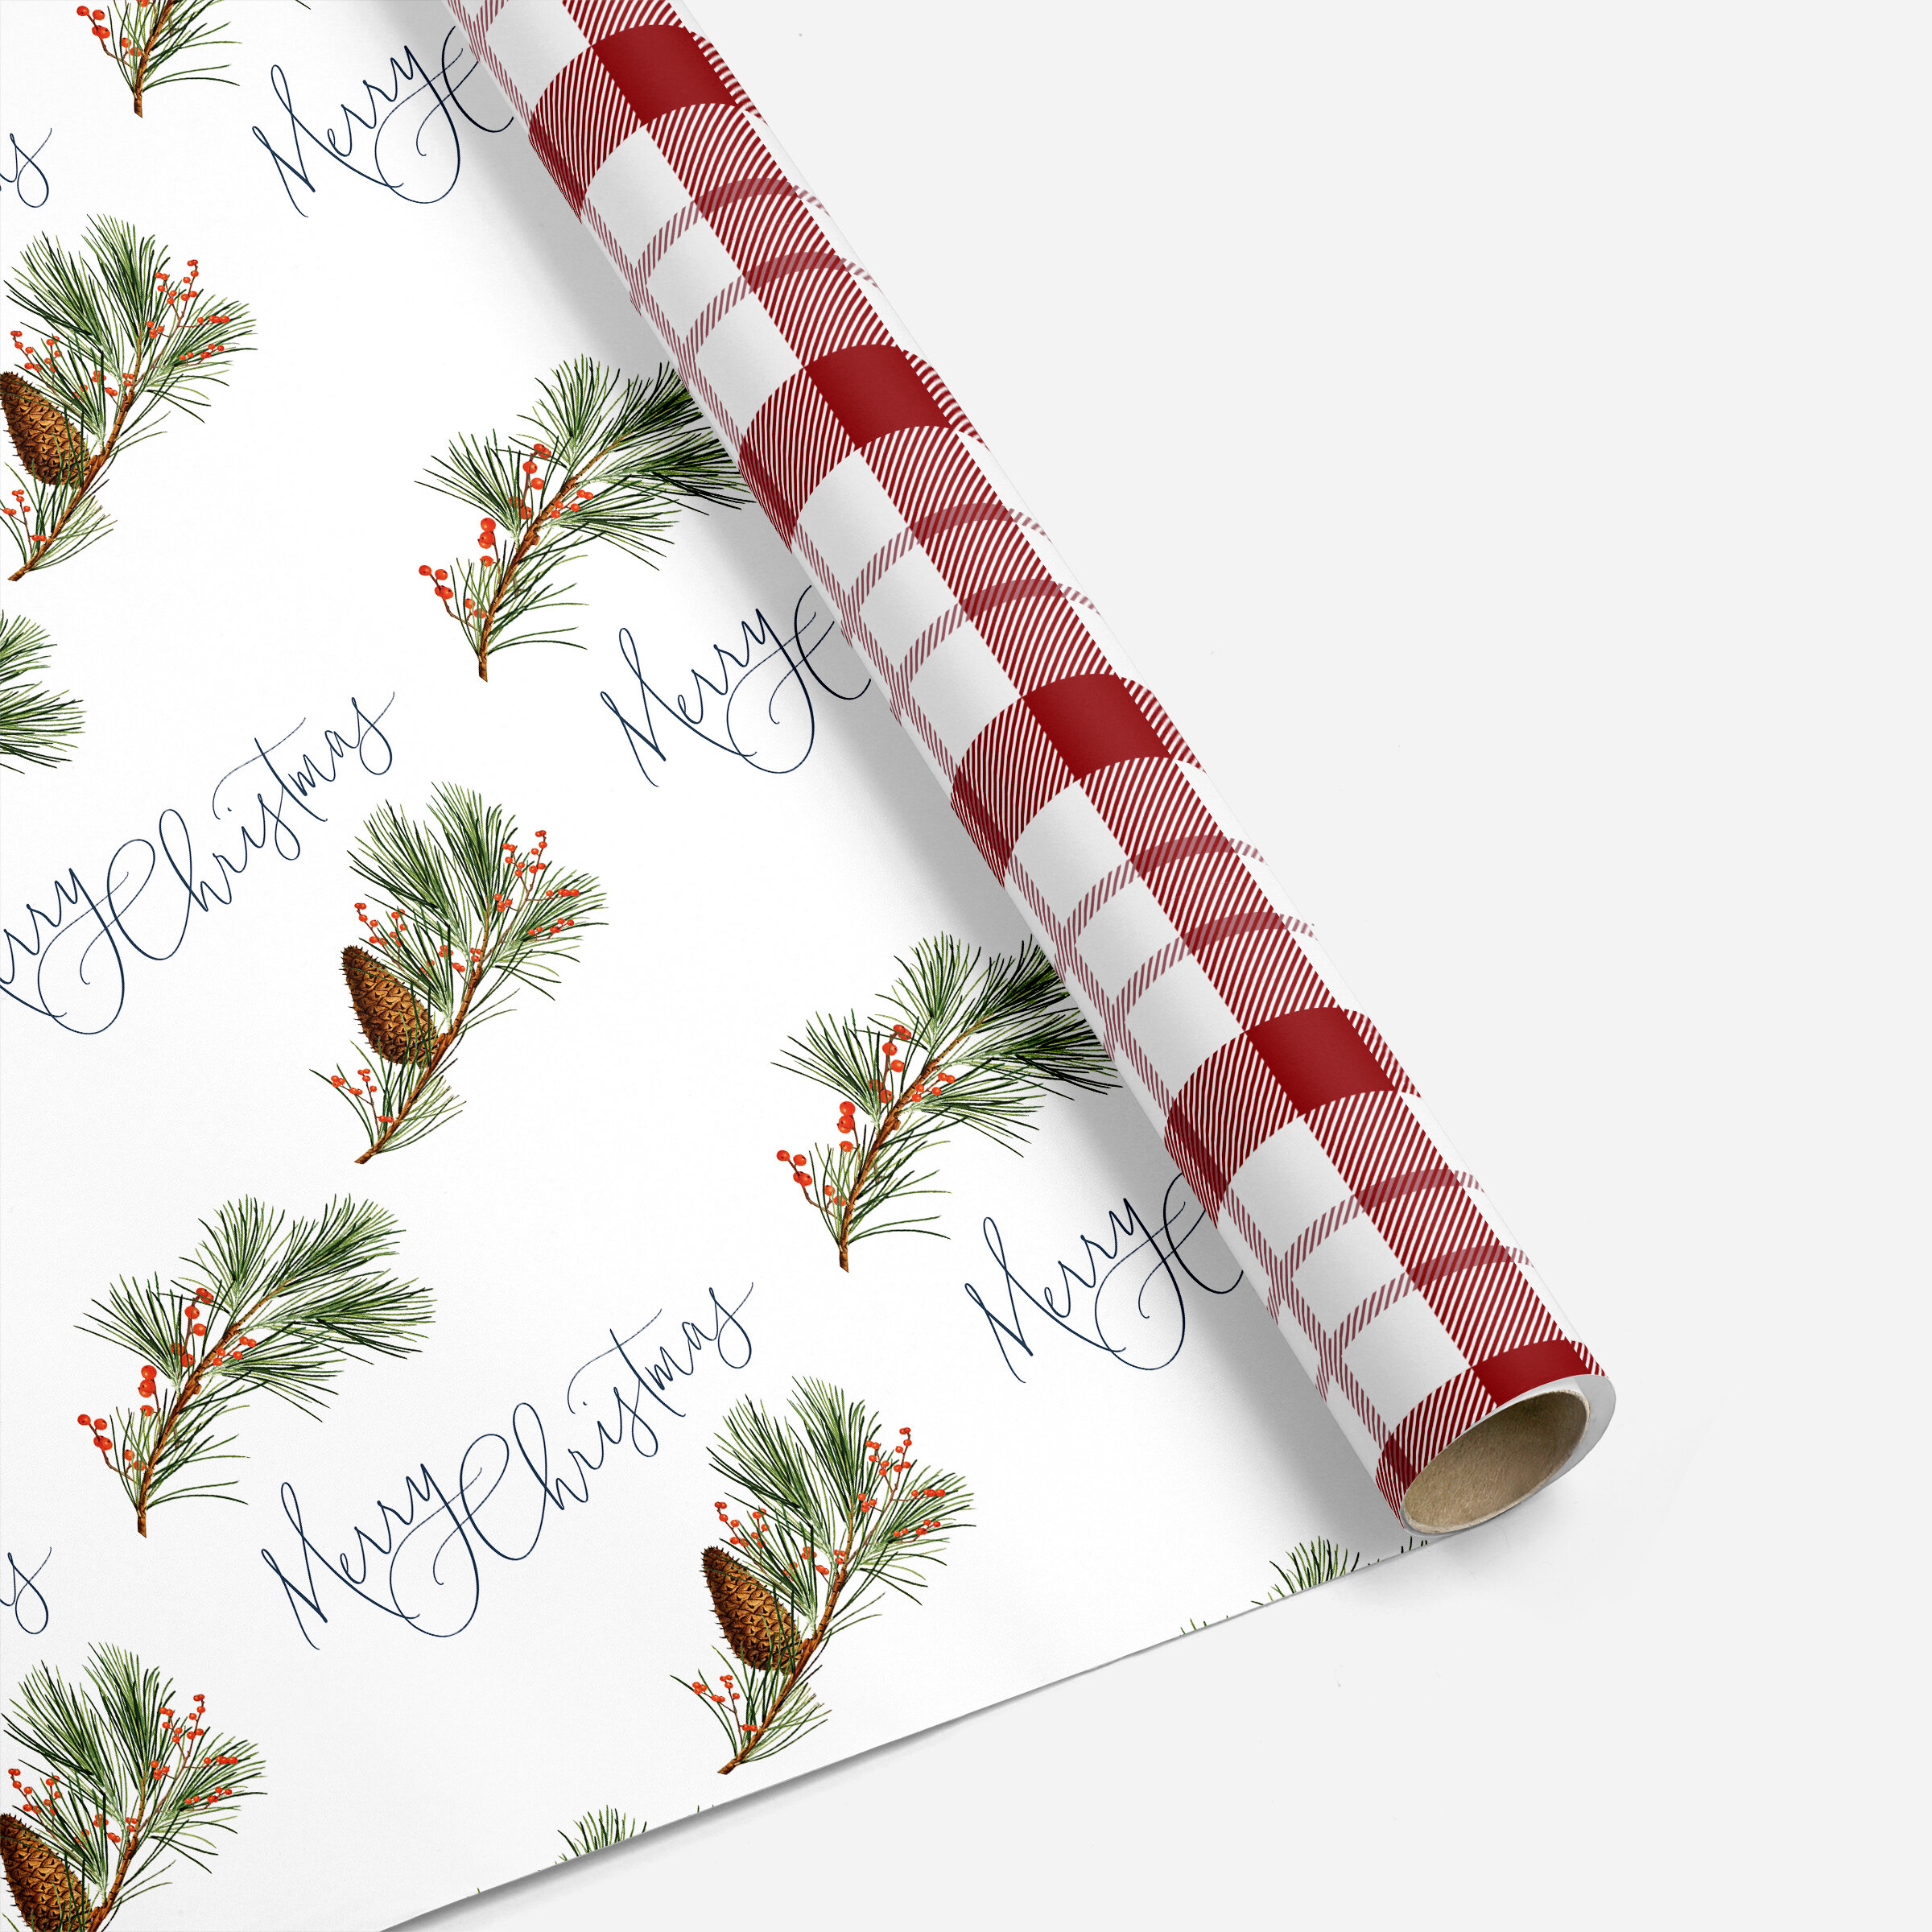 Calligraphy & Pine Christmas Double-Sided Wrapping Paper, with